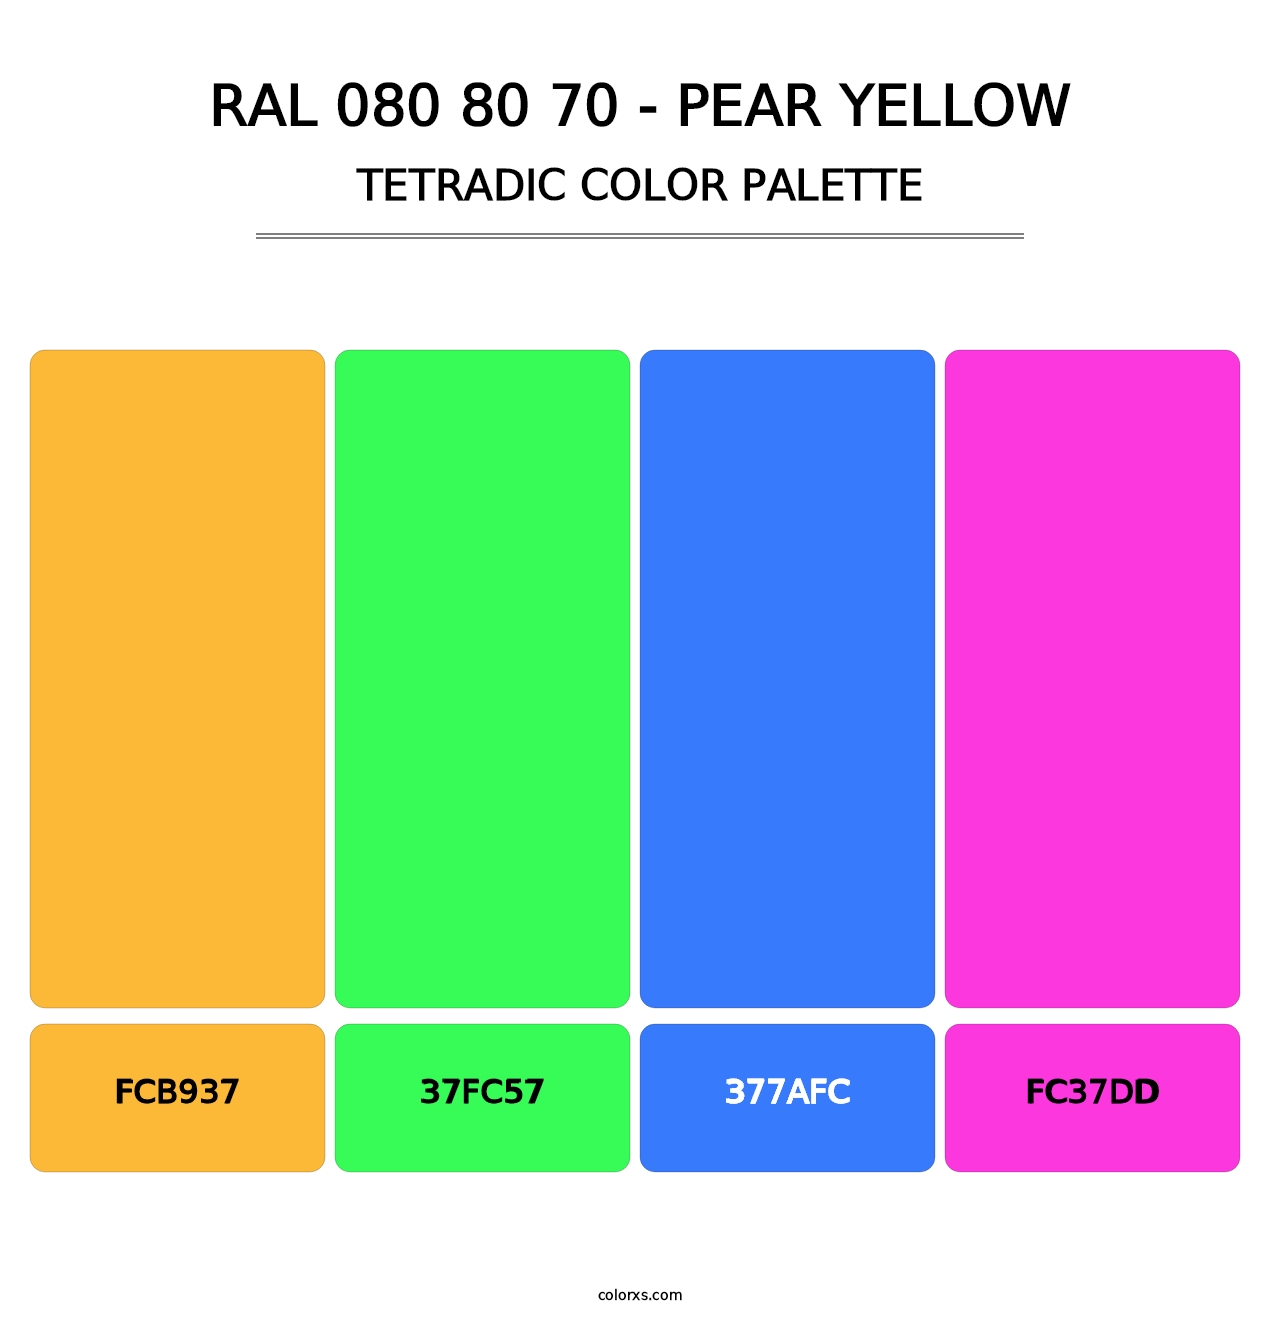 RAL 080 80 70 - Pear Yellow - Tetradic Color Palette